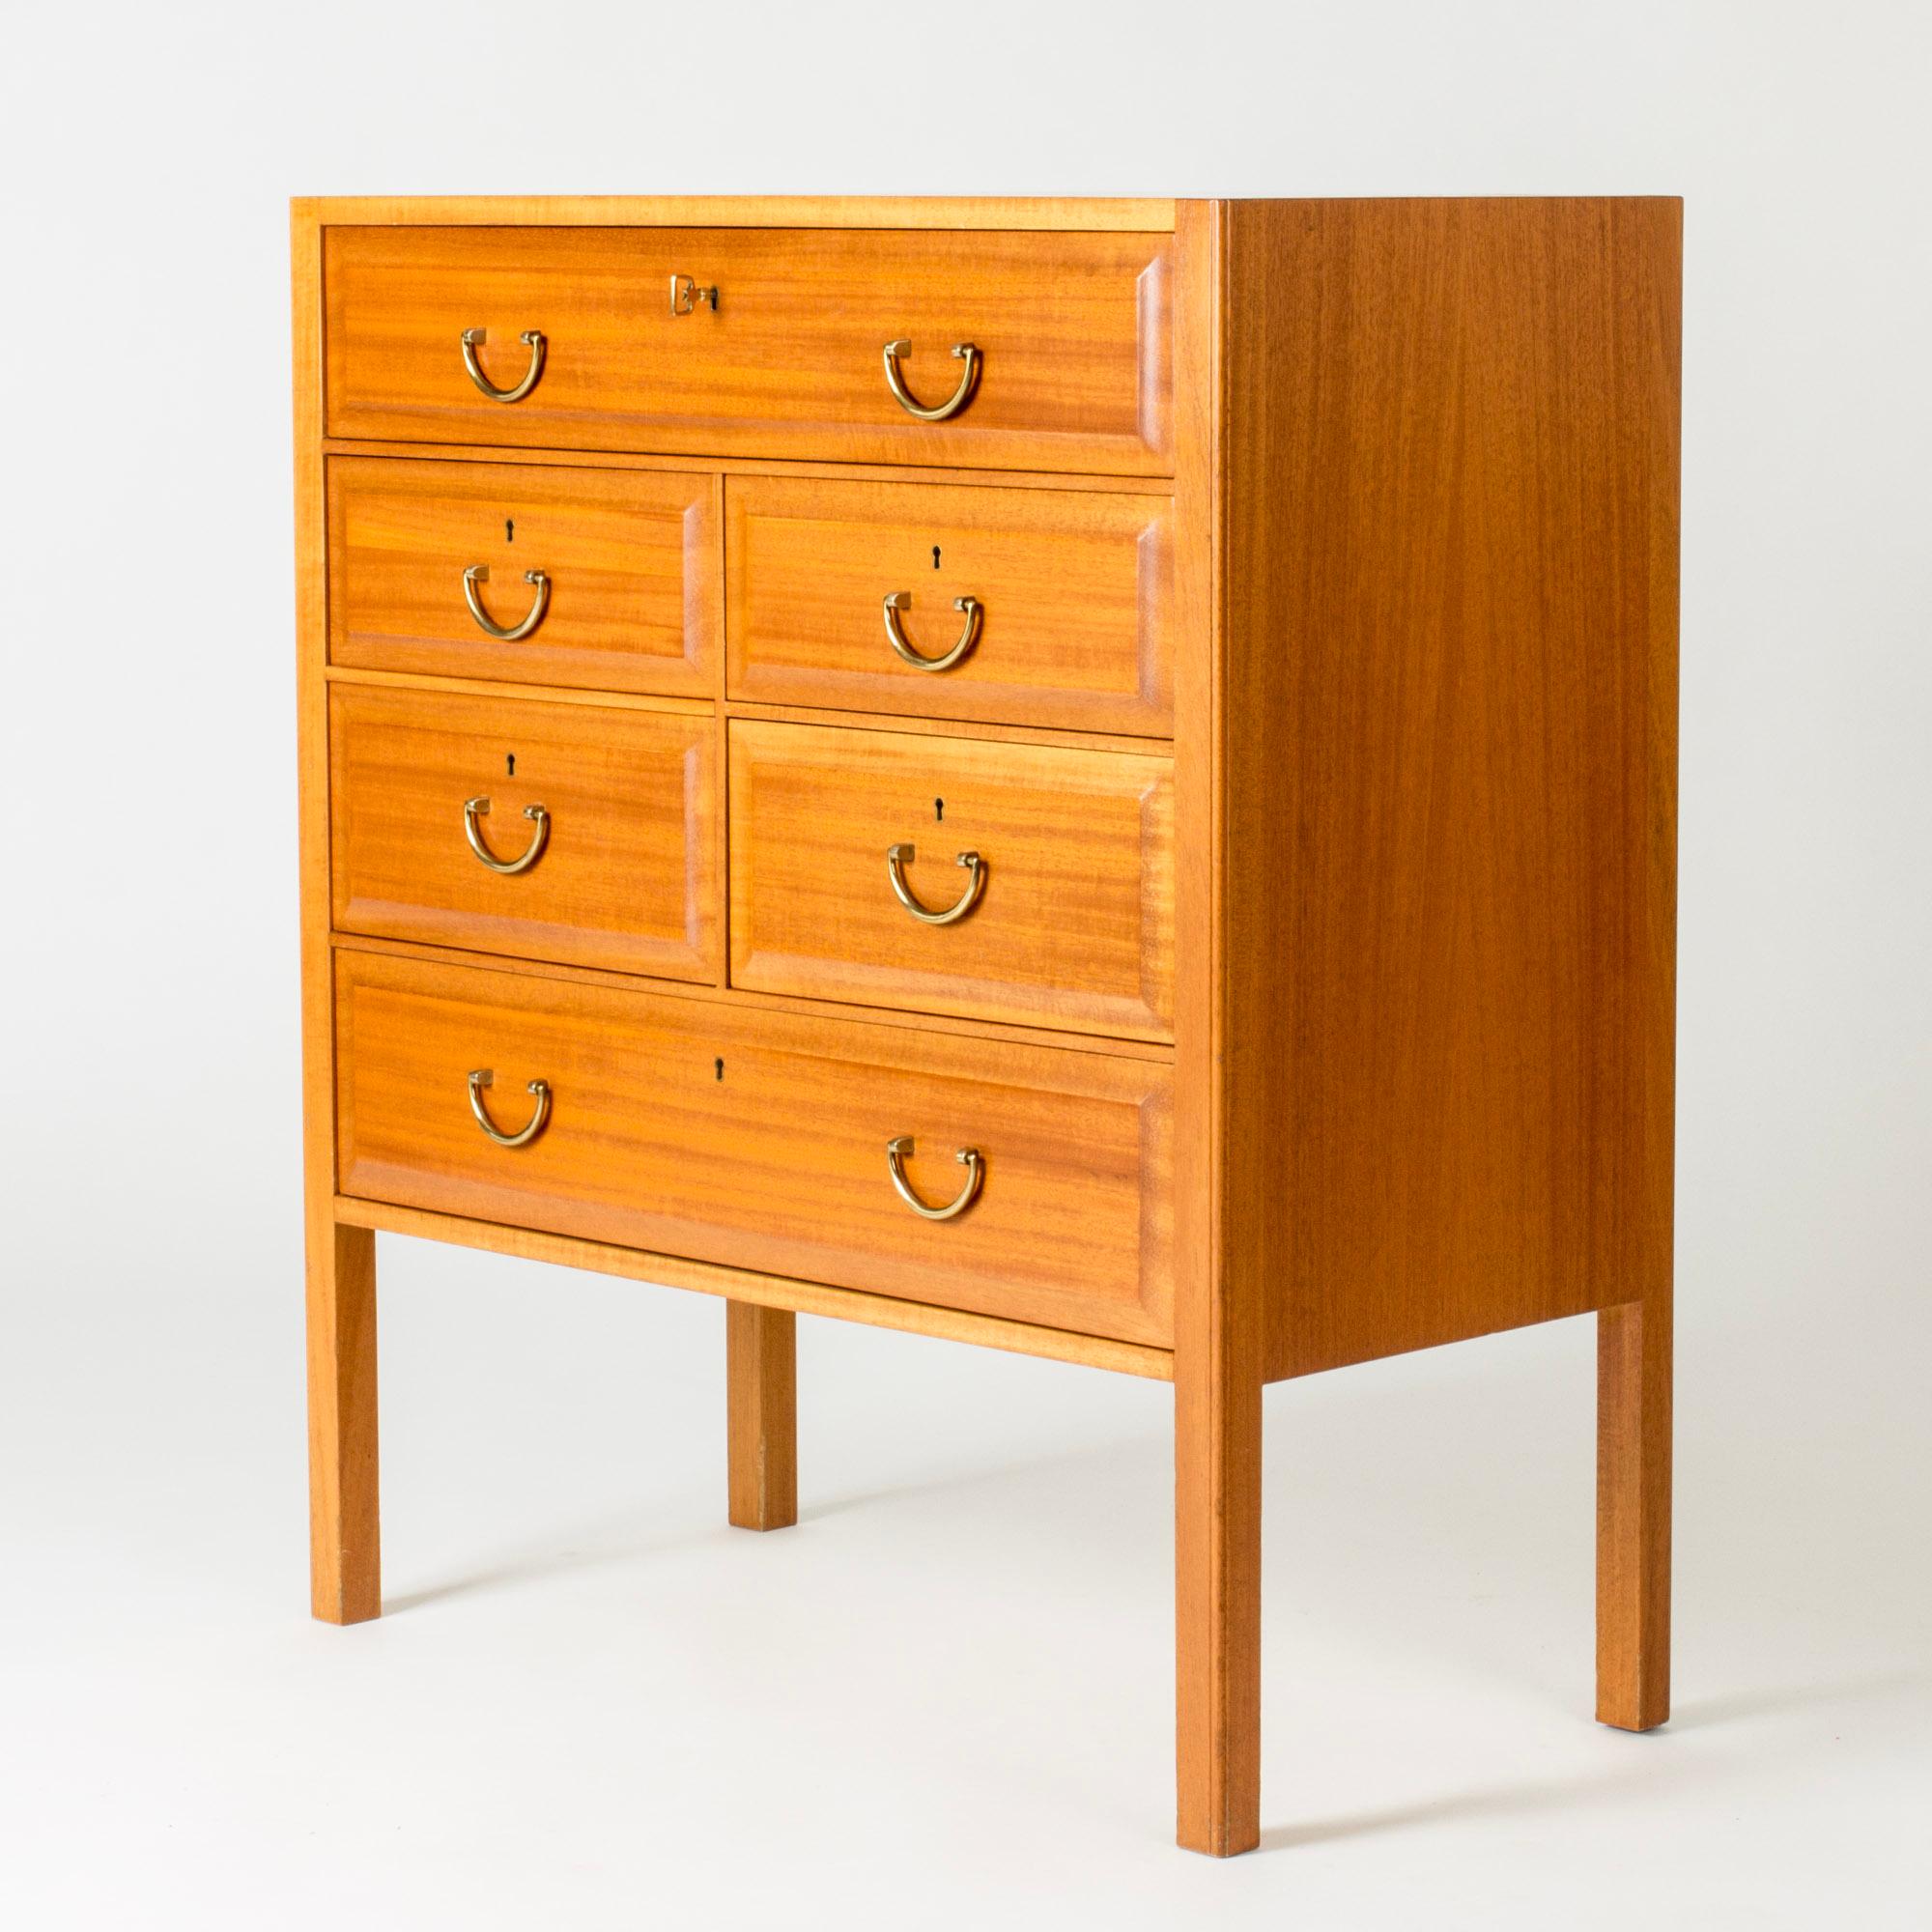 Elegant chest of drawers by Josef Frank, made from mahogany. Beveled edges around the drawers, brass handles. Lighter wood stripe inlayed around the edge of the table top.